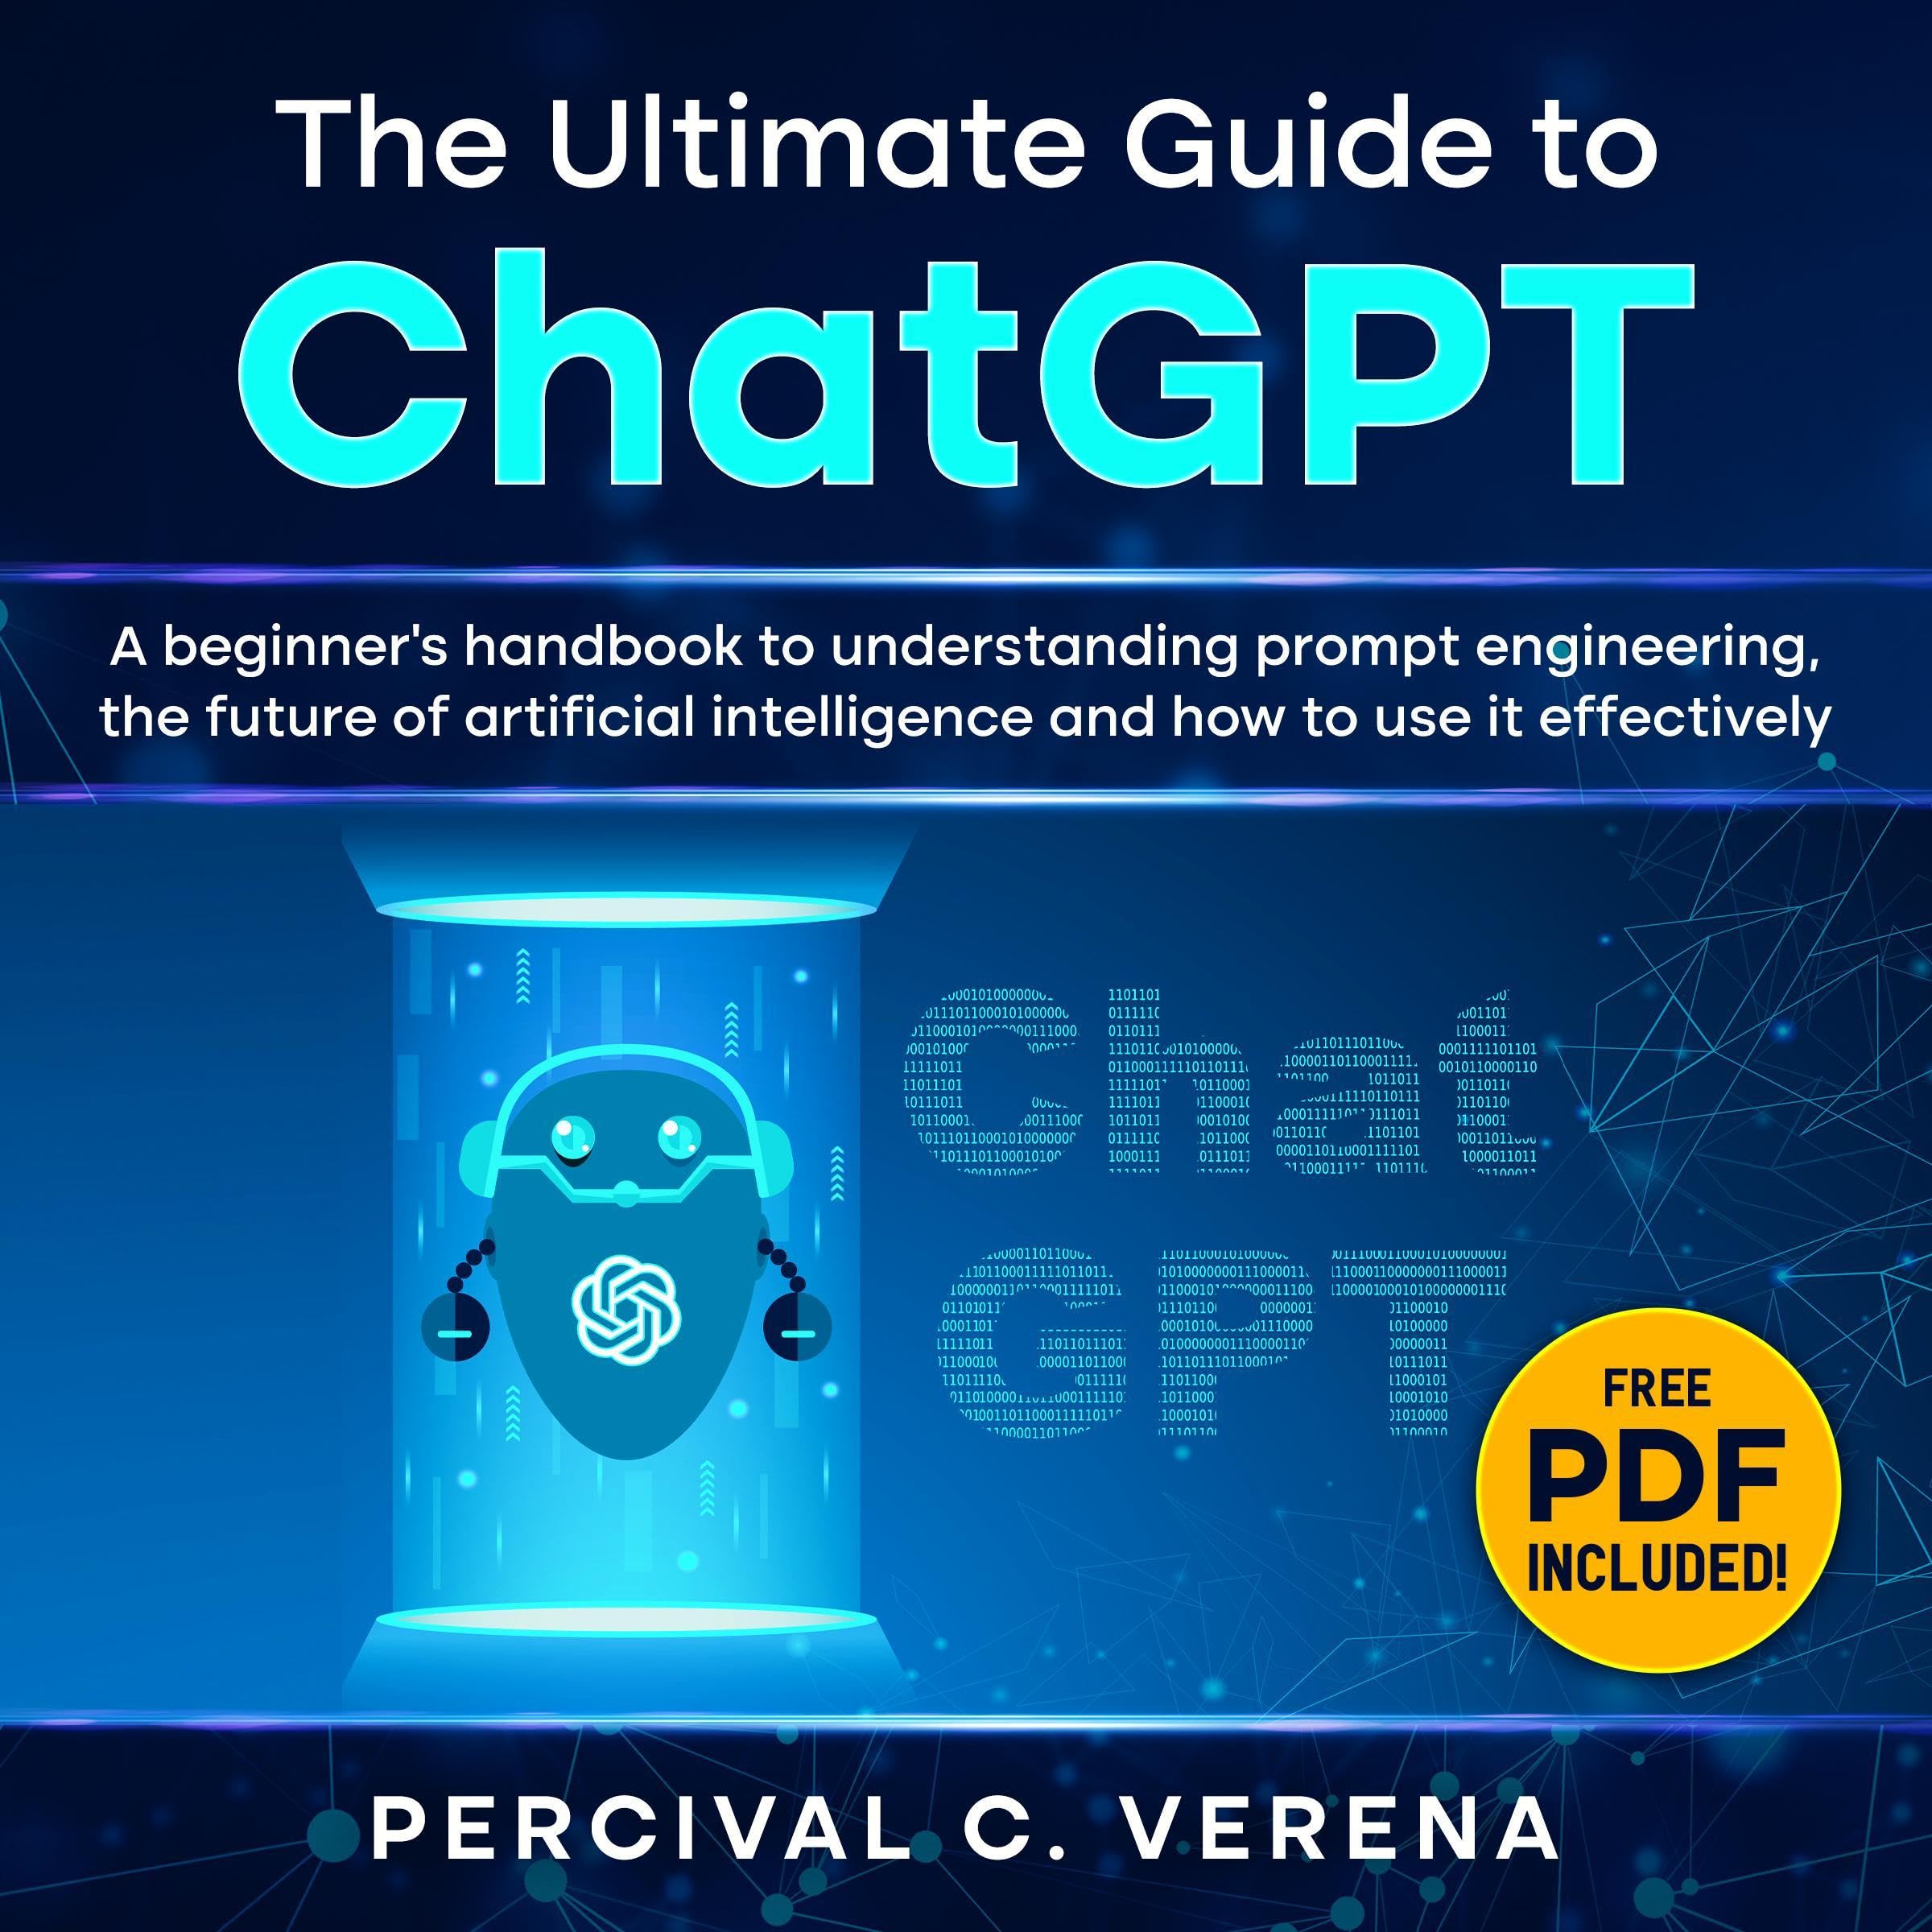 The Ultimate Guide to ChatGPT: A Beginner's Handbook to Understanding Prompt Engineering, the Future of Artificial Intelligence and How to Use It Effectively